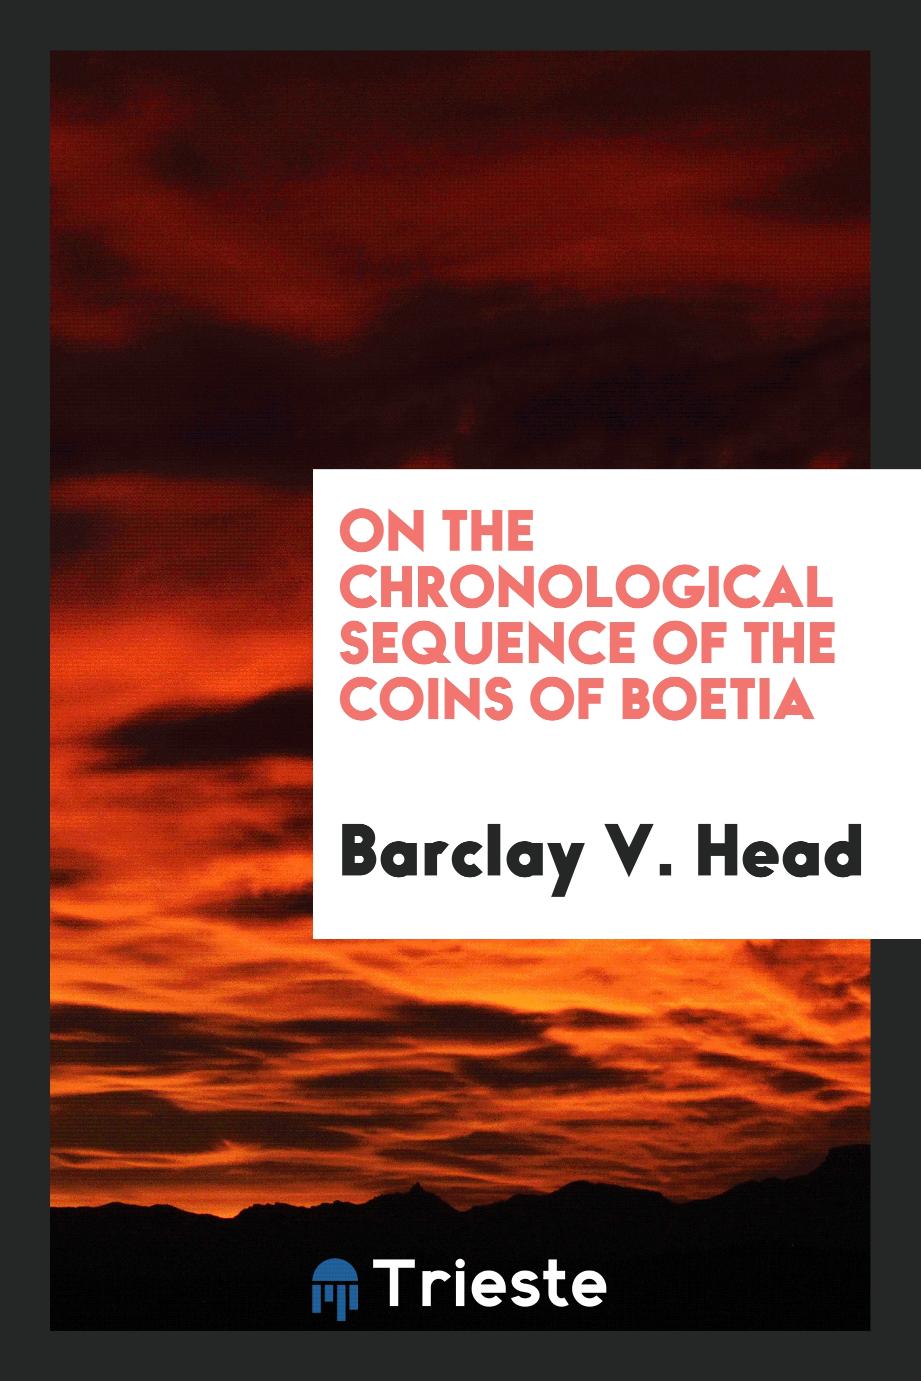 On the Chronological Sequence of the Coins of Boetia